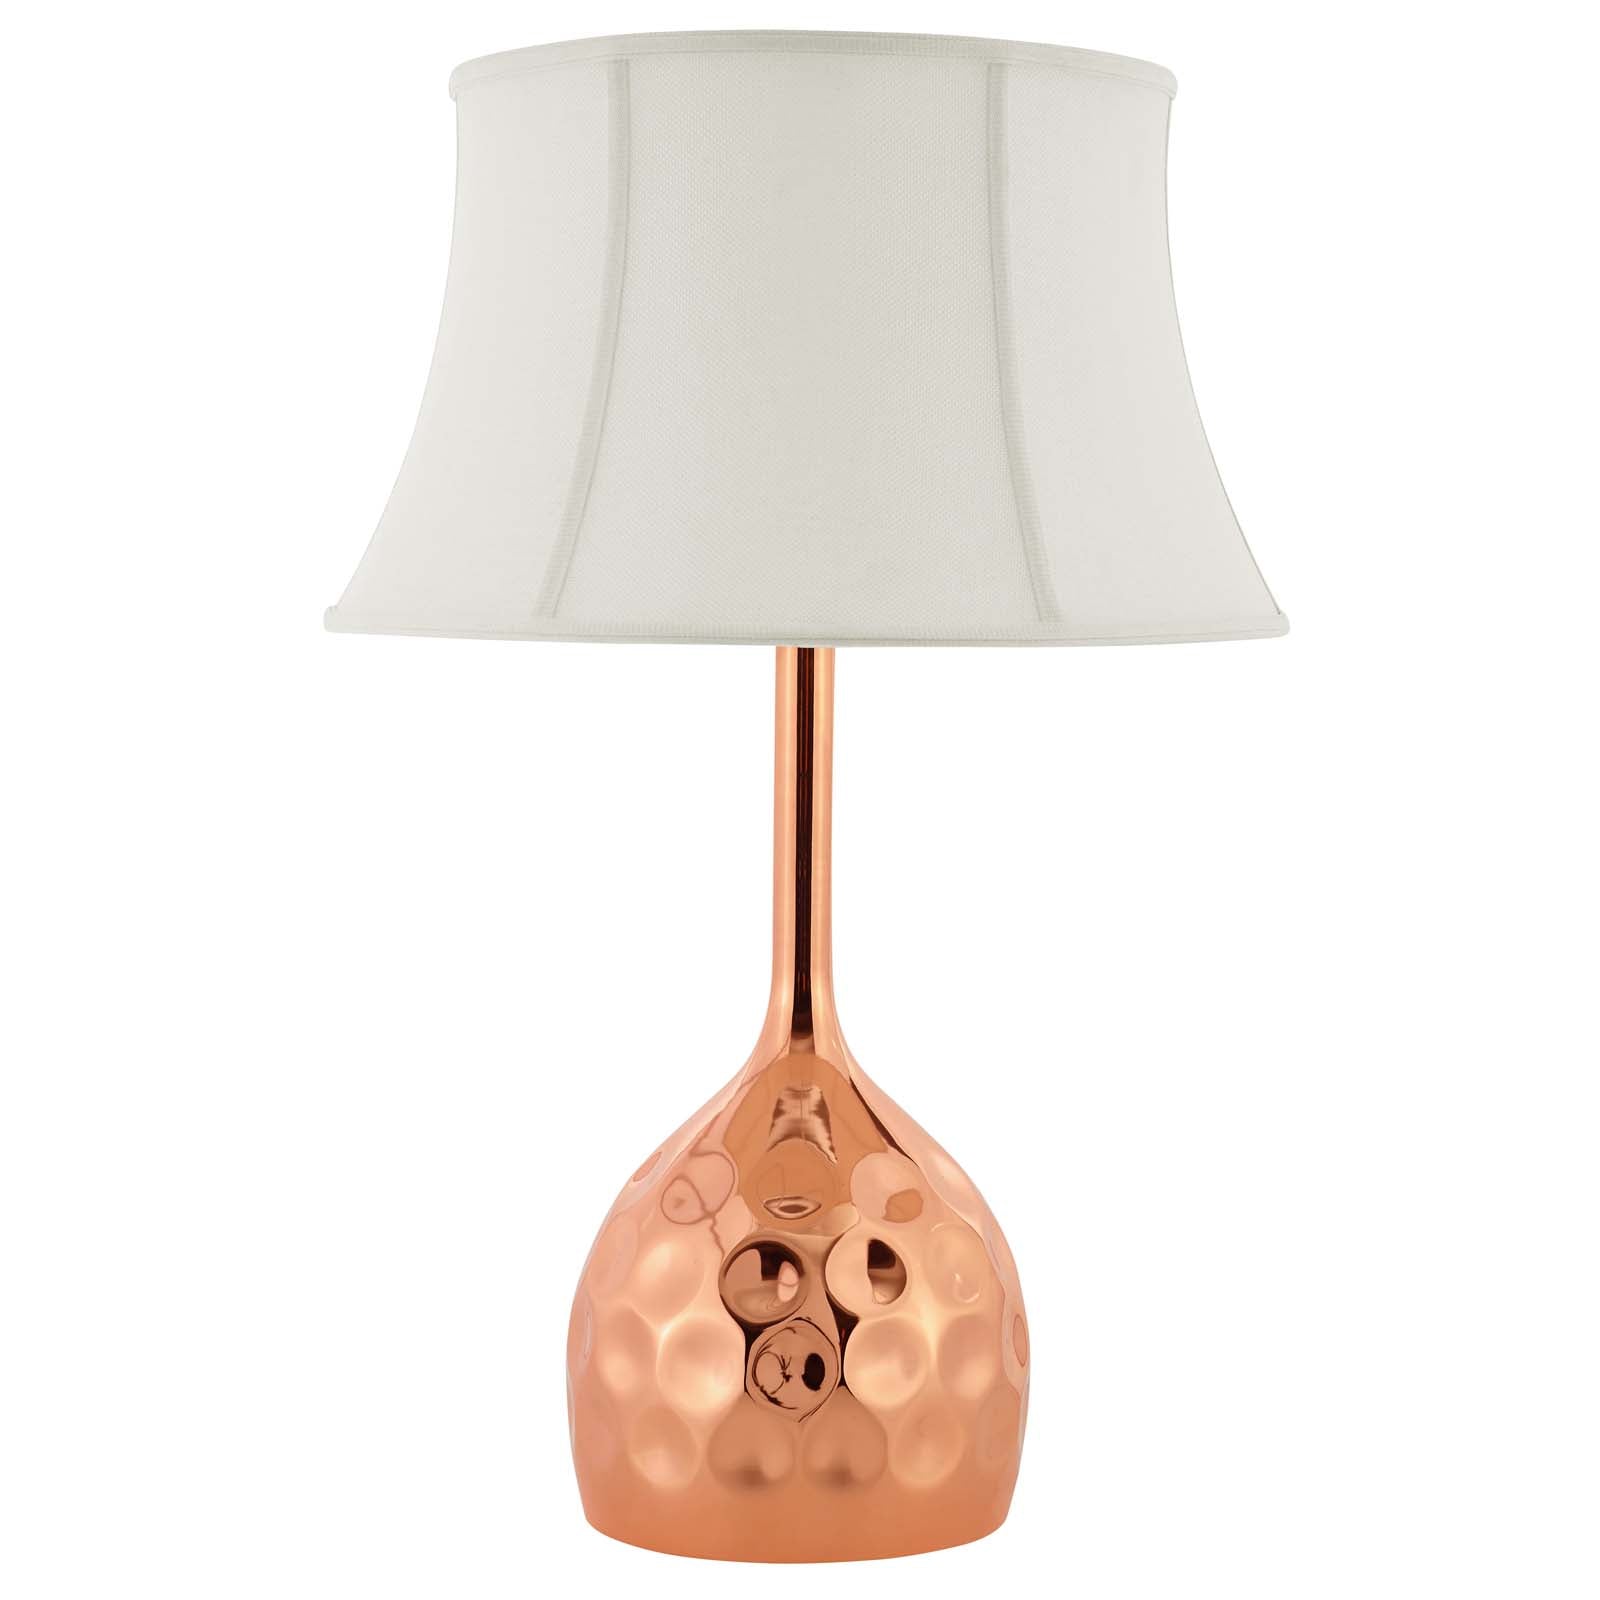 Dimple Rose Gold Circular Hammered Table Lamp - Beige Linen W/ Bell Shade - E26 60W Light Bulb (Not Included)